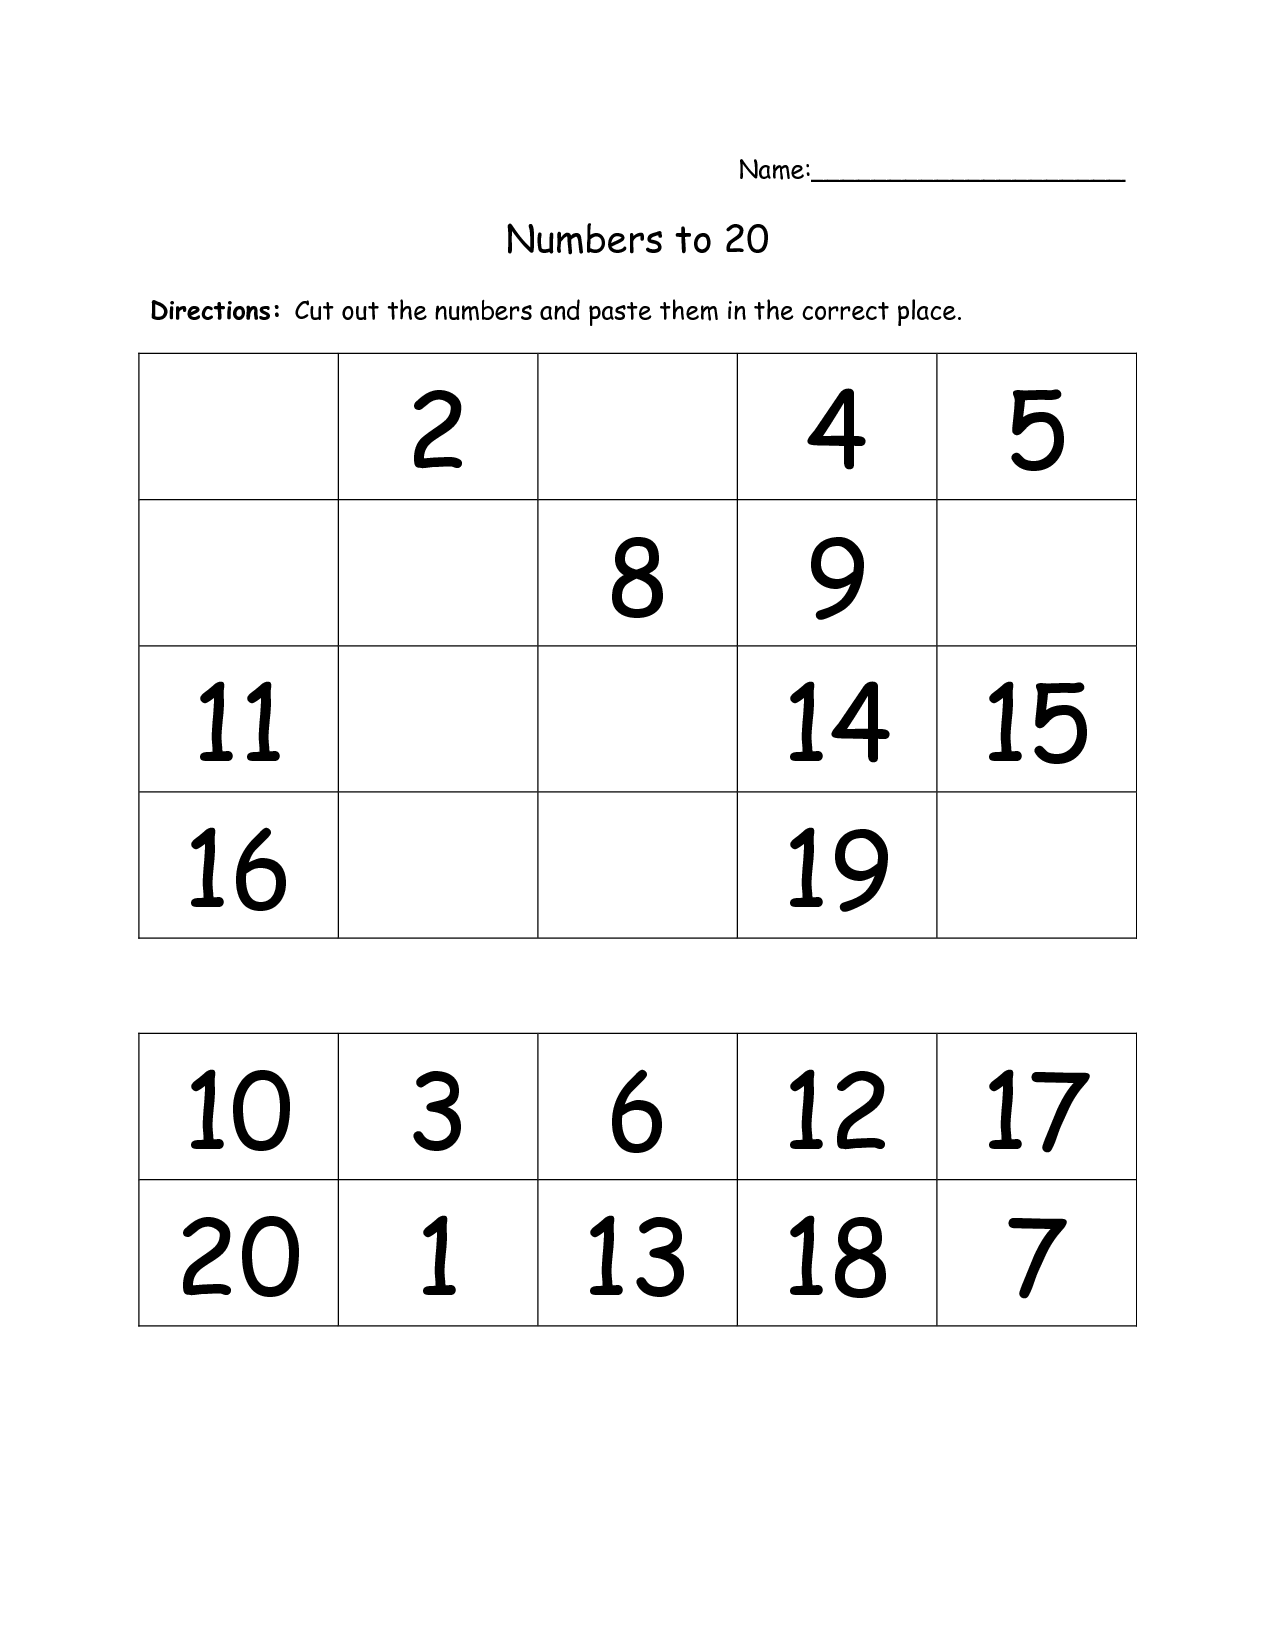 19-best-images-of-cut-and-paste-numbers-1-20-worksheet-cut-and-paste-numbers-1-20-cut-and